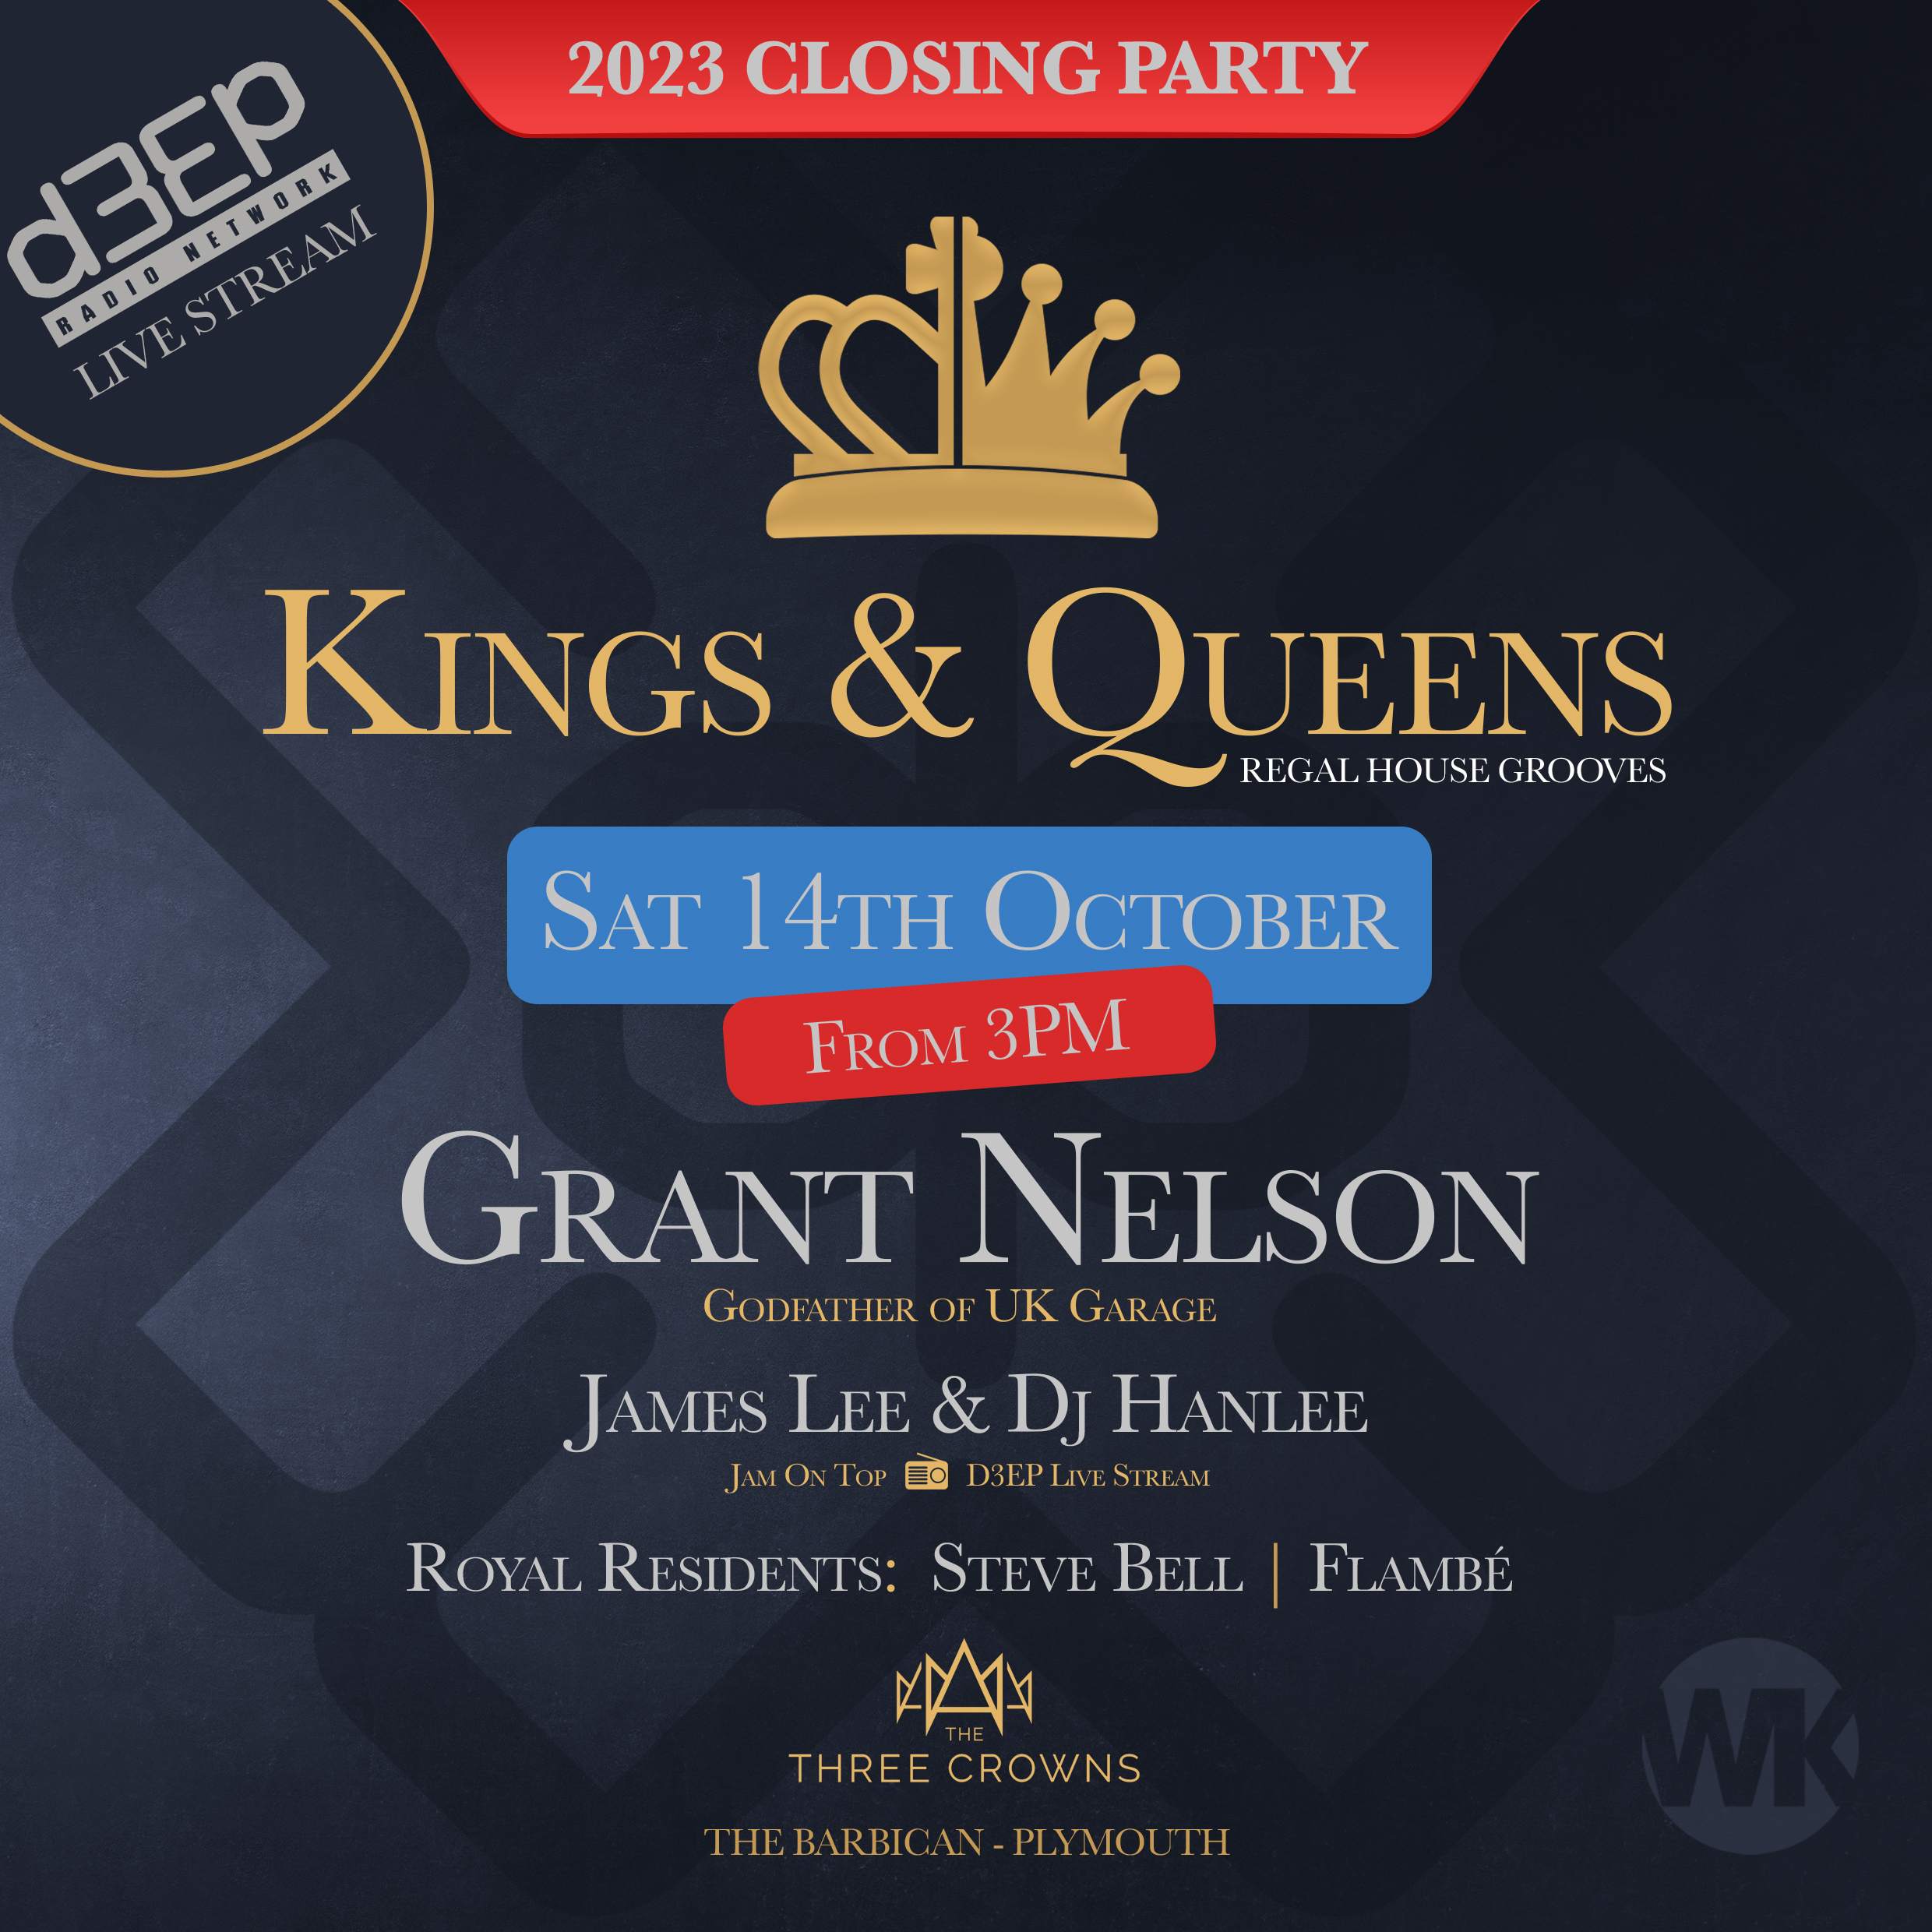 Kings & Queens Closing Party 2023 - フライヤー表